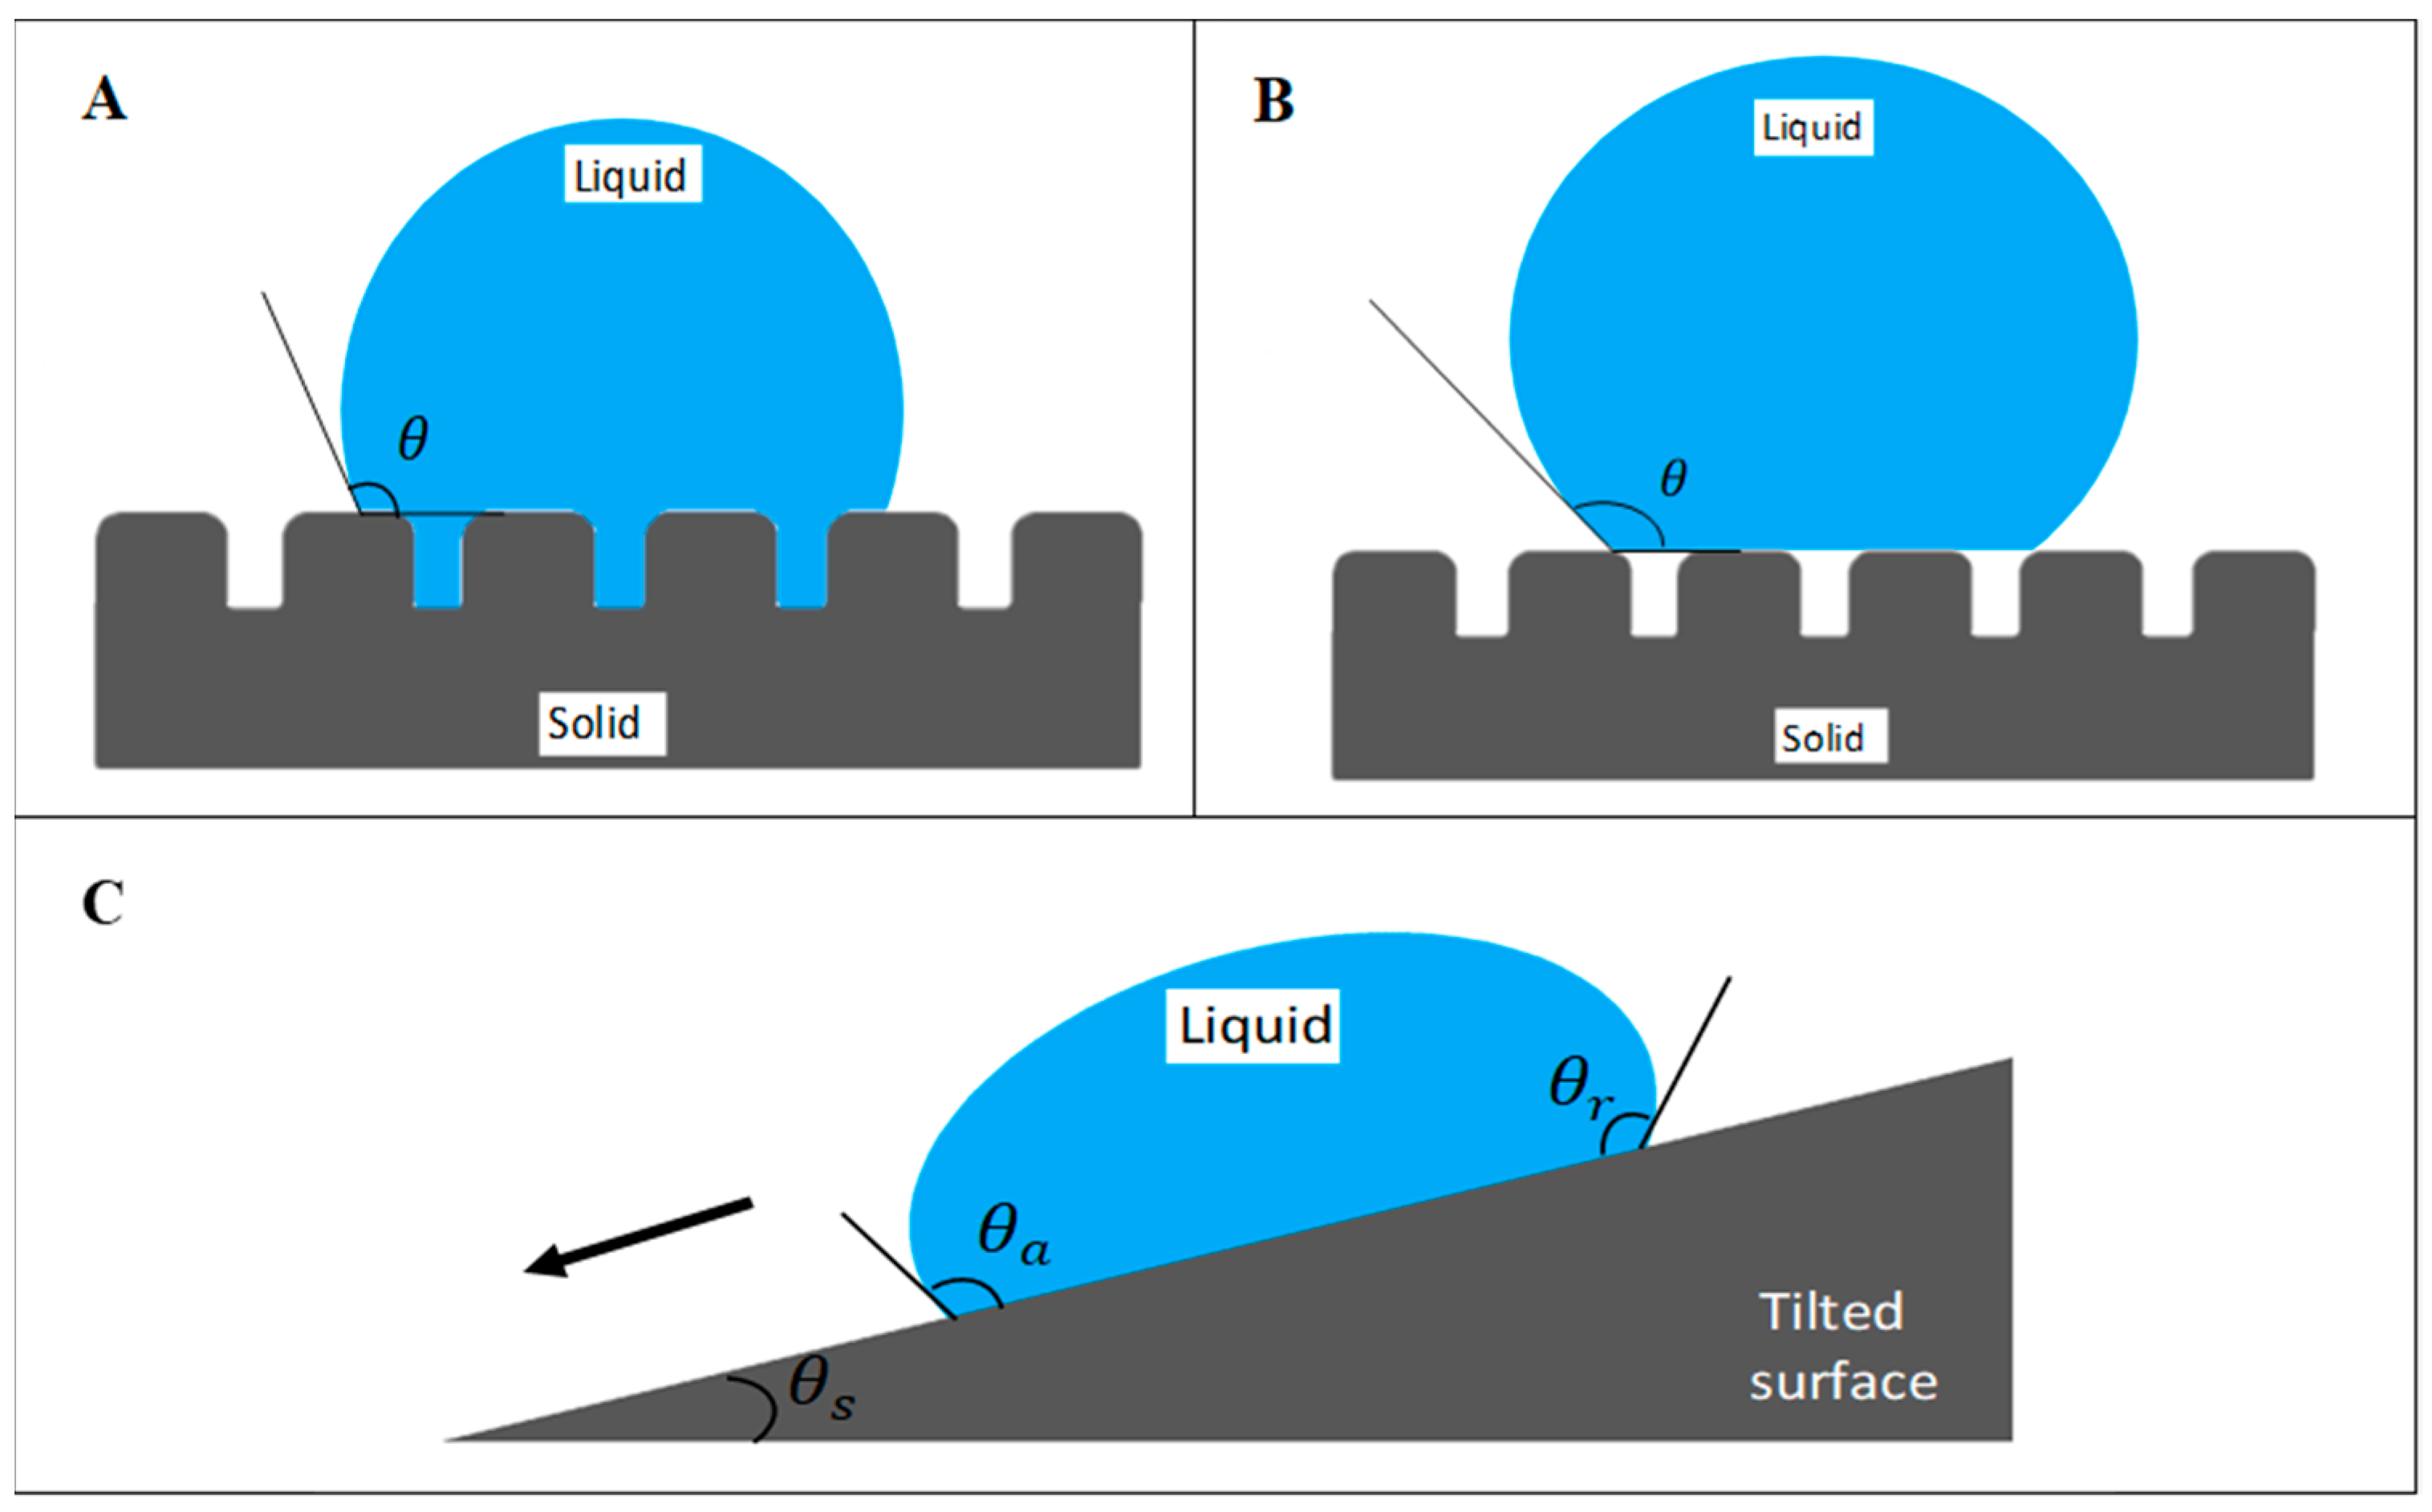 Physical Texturing for Superhydrophobic Polymeric Surfaces: A